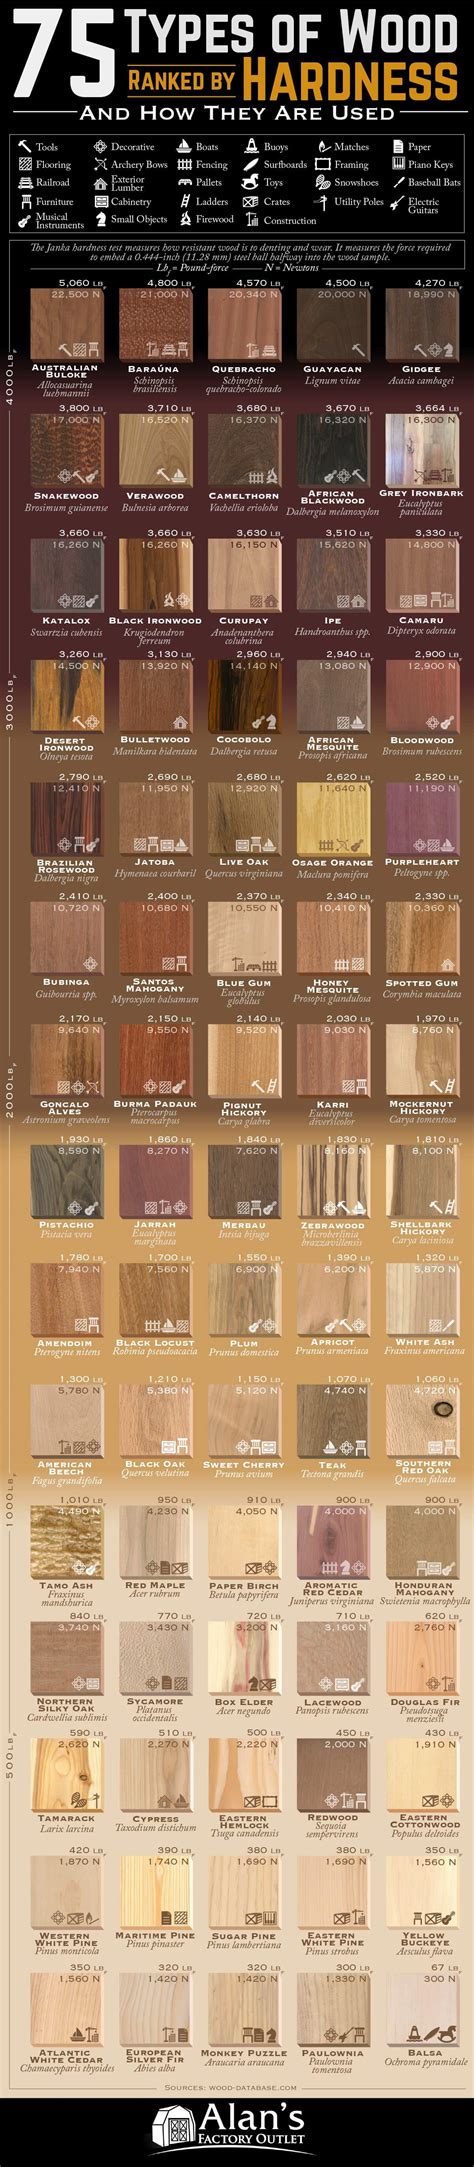 75 Types Of Wood Ranked By Janka Hardness Uses